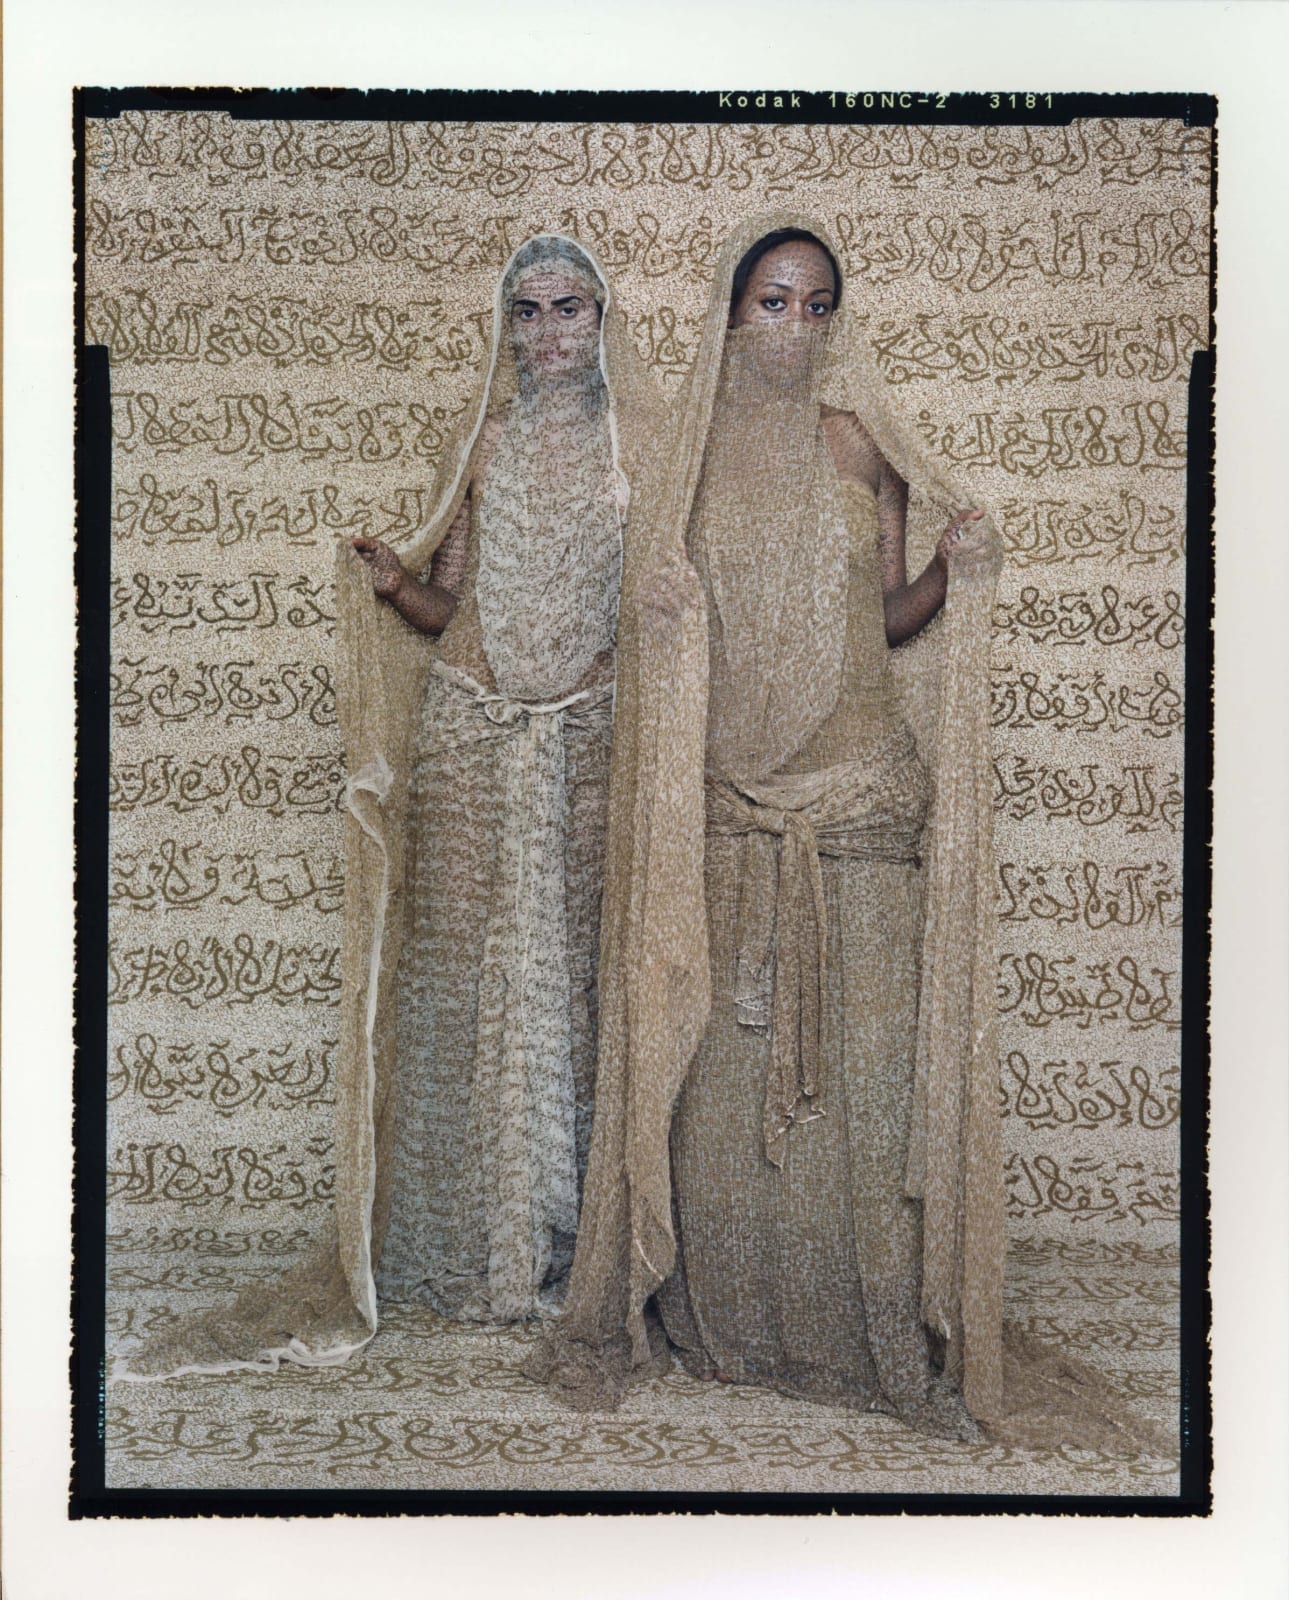 Two standing women wearing face veils with henna calligraphy inscribed on clothing fabric and skin, from the Les Femmes du Maroc series, by Lalla Essaydi